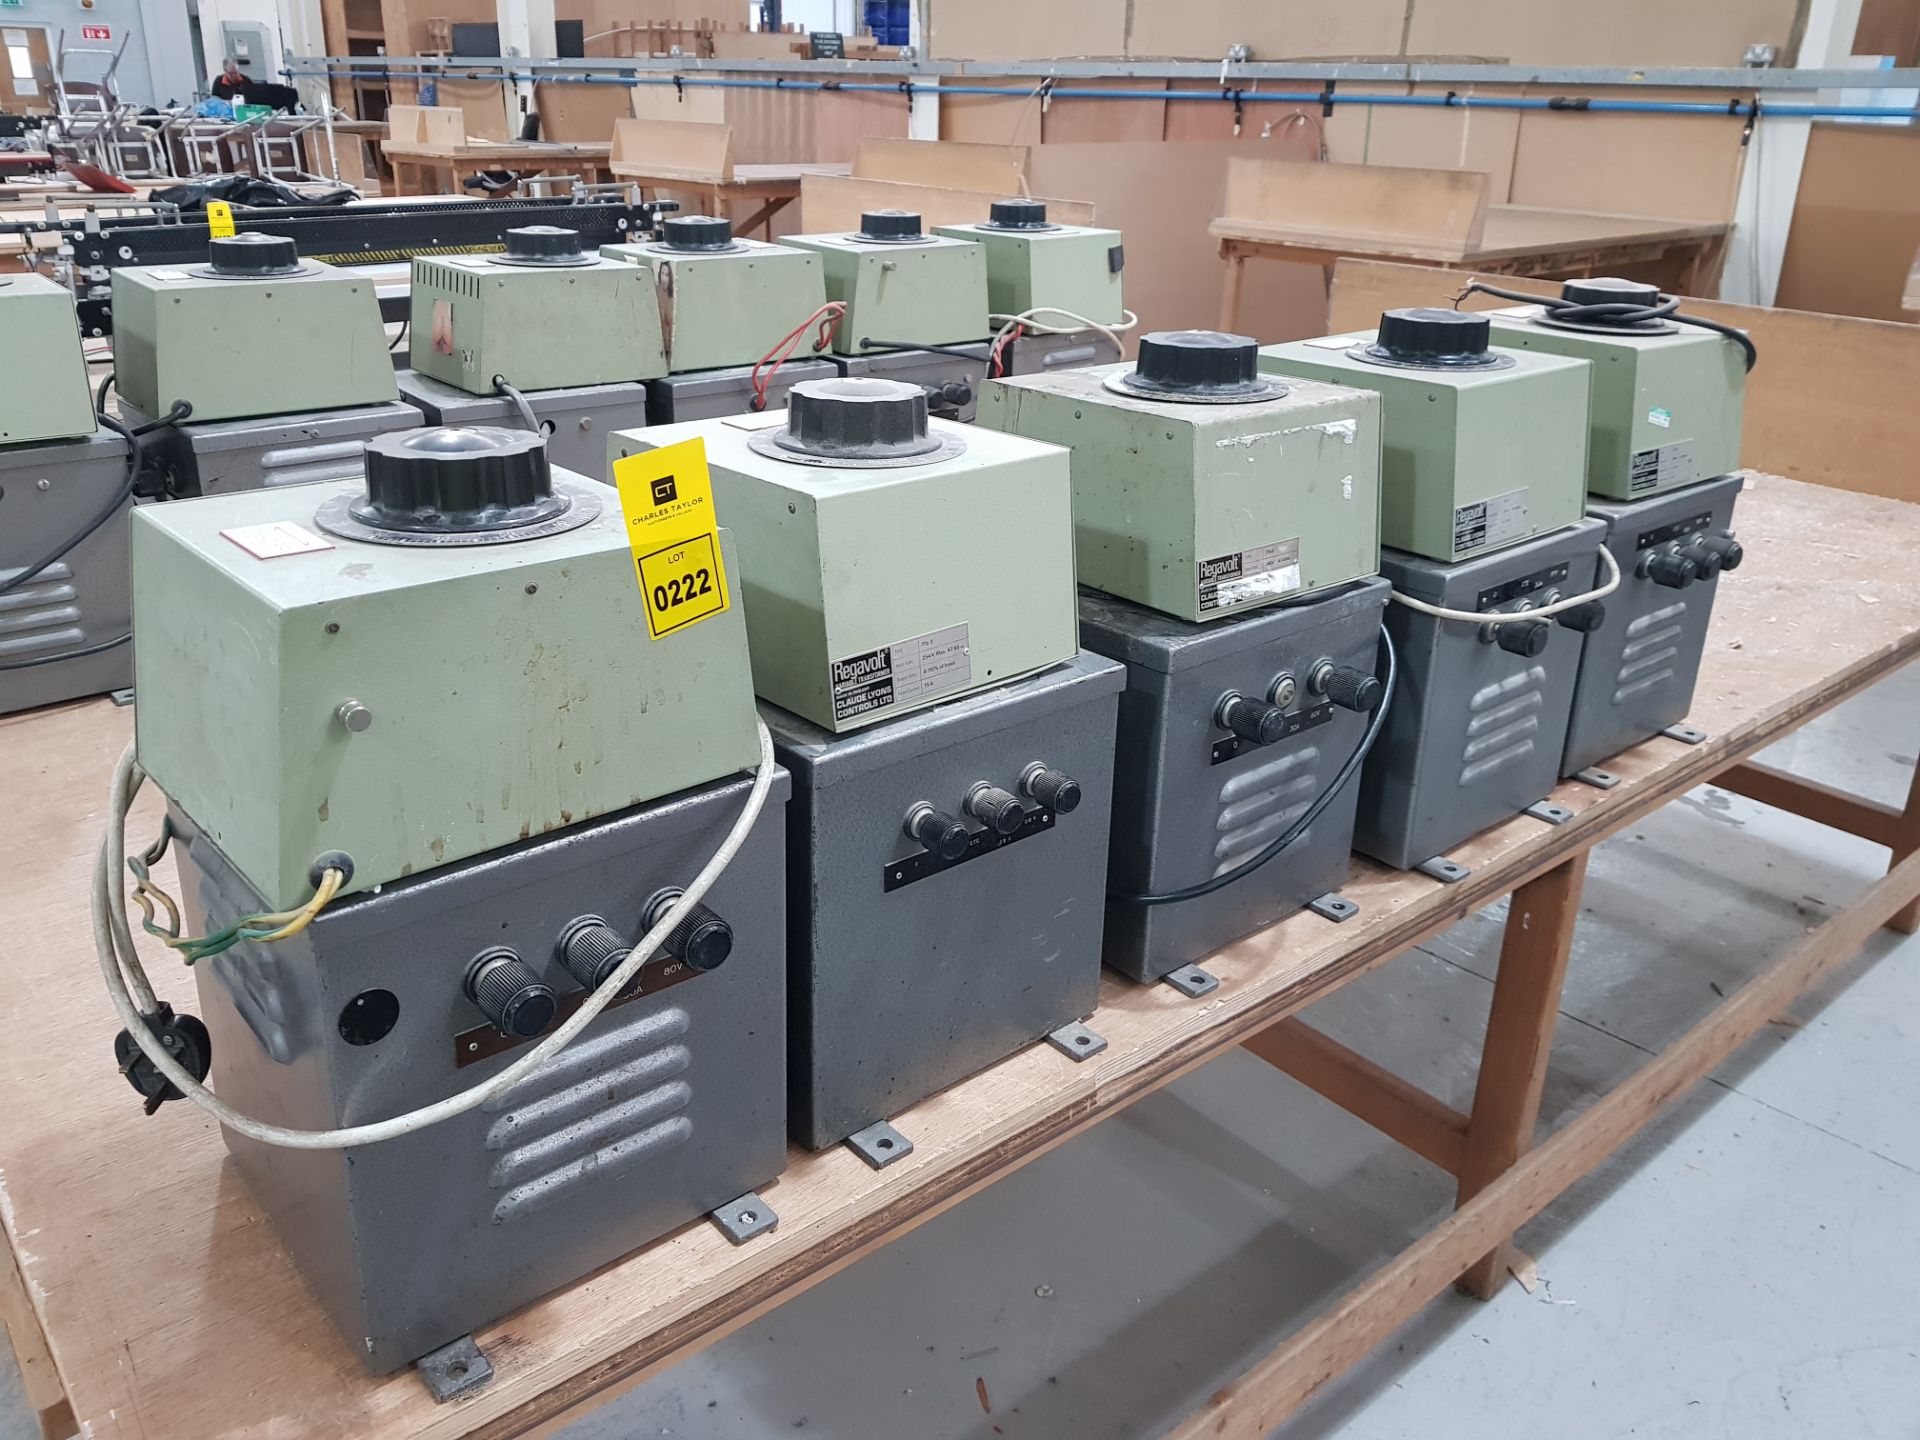 5 X REGAVOLT 715E VARIABLE TRANSFORMERS - 240 VOLTS (ASSETS LOCATED IN DENTON, MANCHESTER. VIEWING